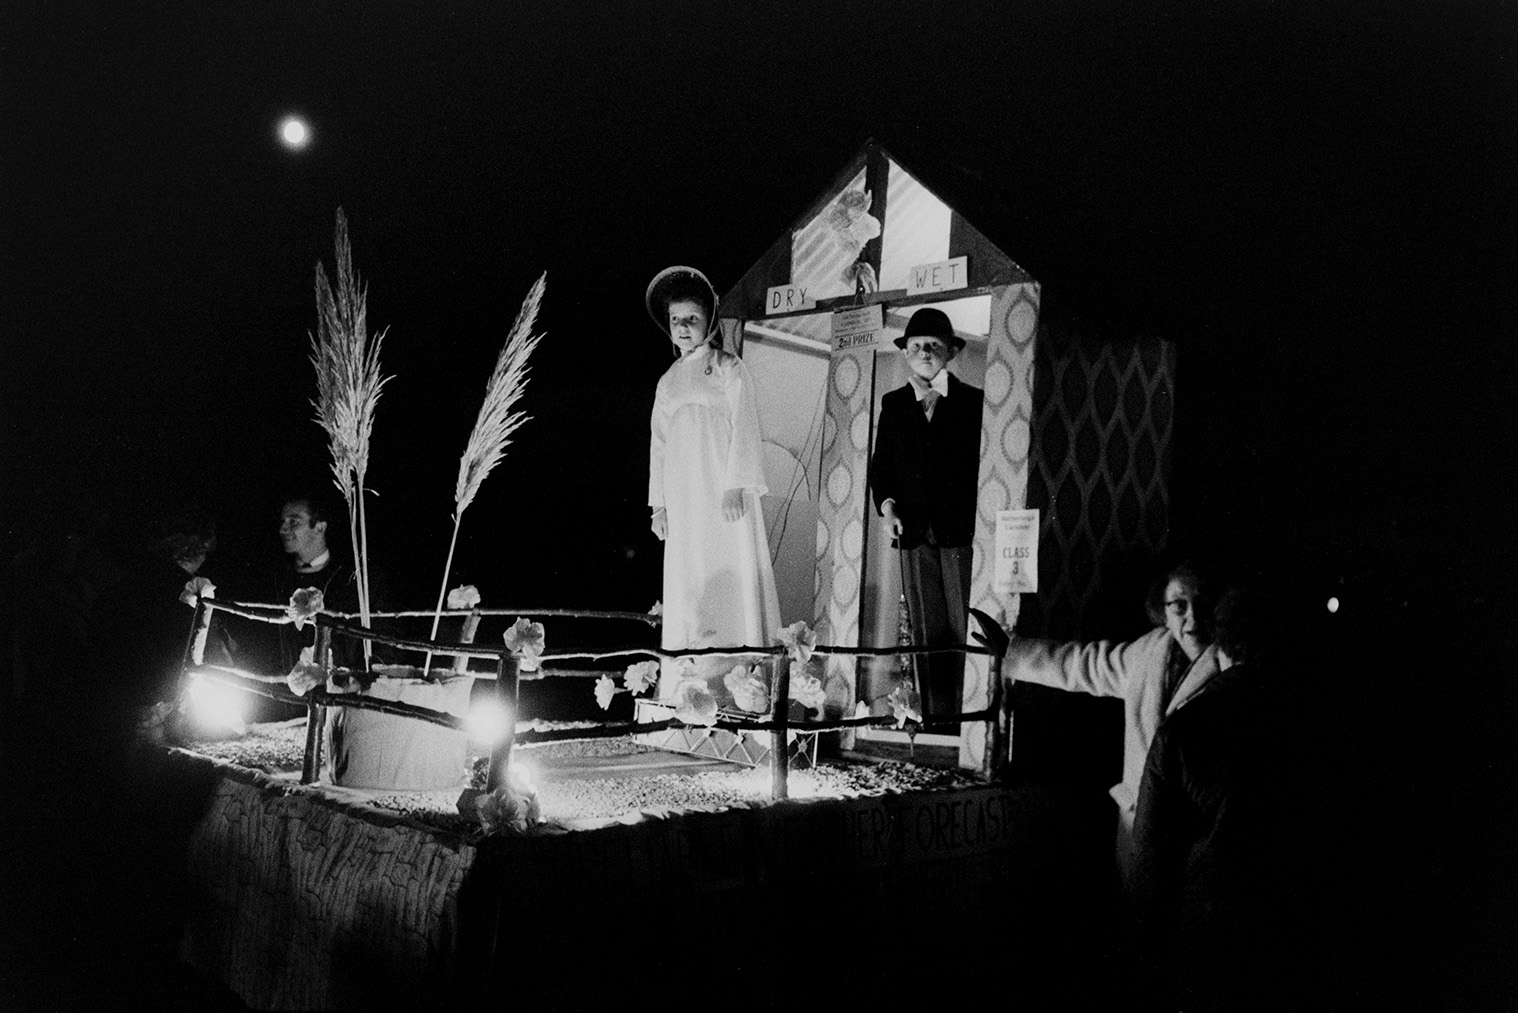 A girl and boy on a weather vane themed carnival float at Hatherleigh Carnival, at night. A woman is walking beside the float.